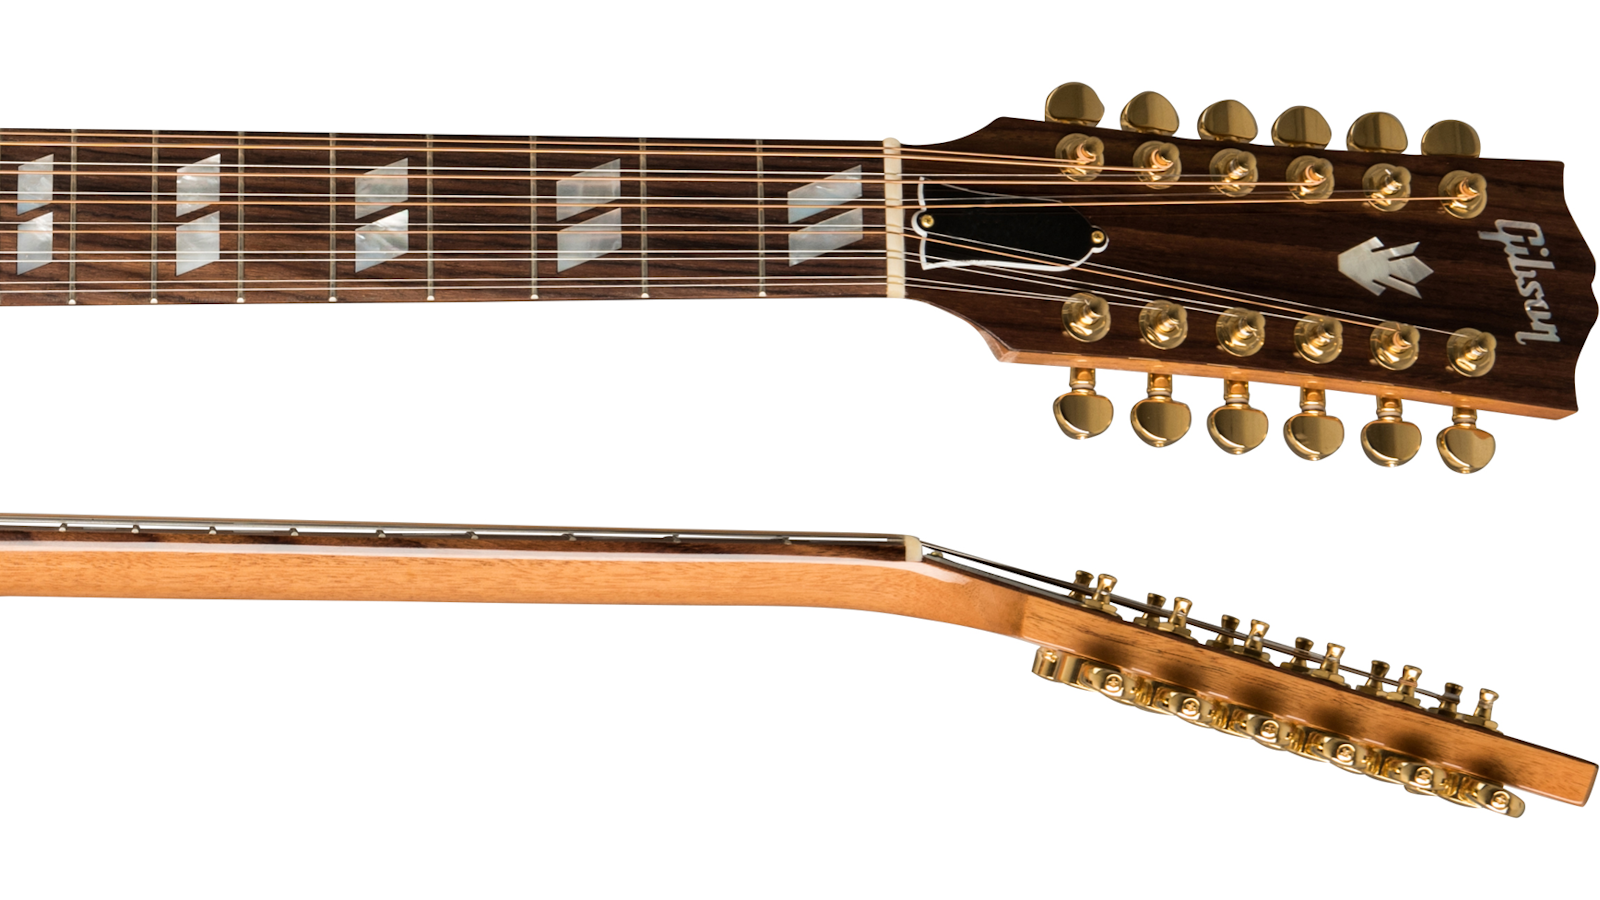 Gibson Songwriter 12-string 2019 Dreadnought 12c Epicea Palissandre Rw - Rosewood Burst - Guitarra electro acustica - Variation 4